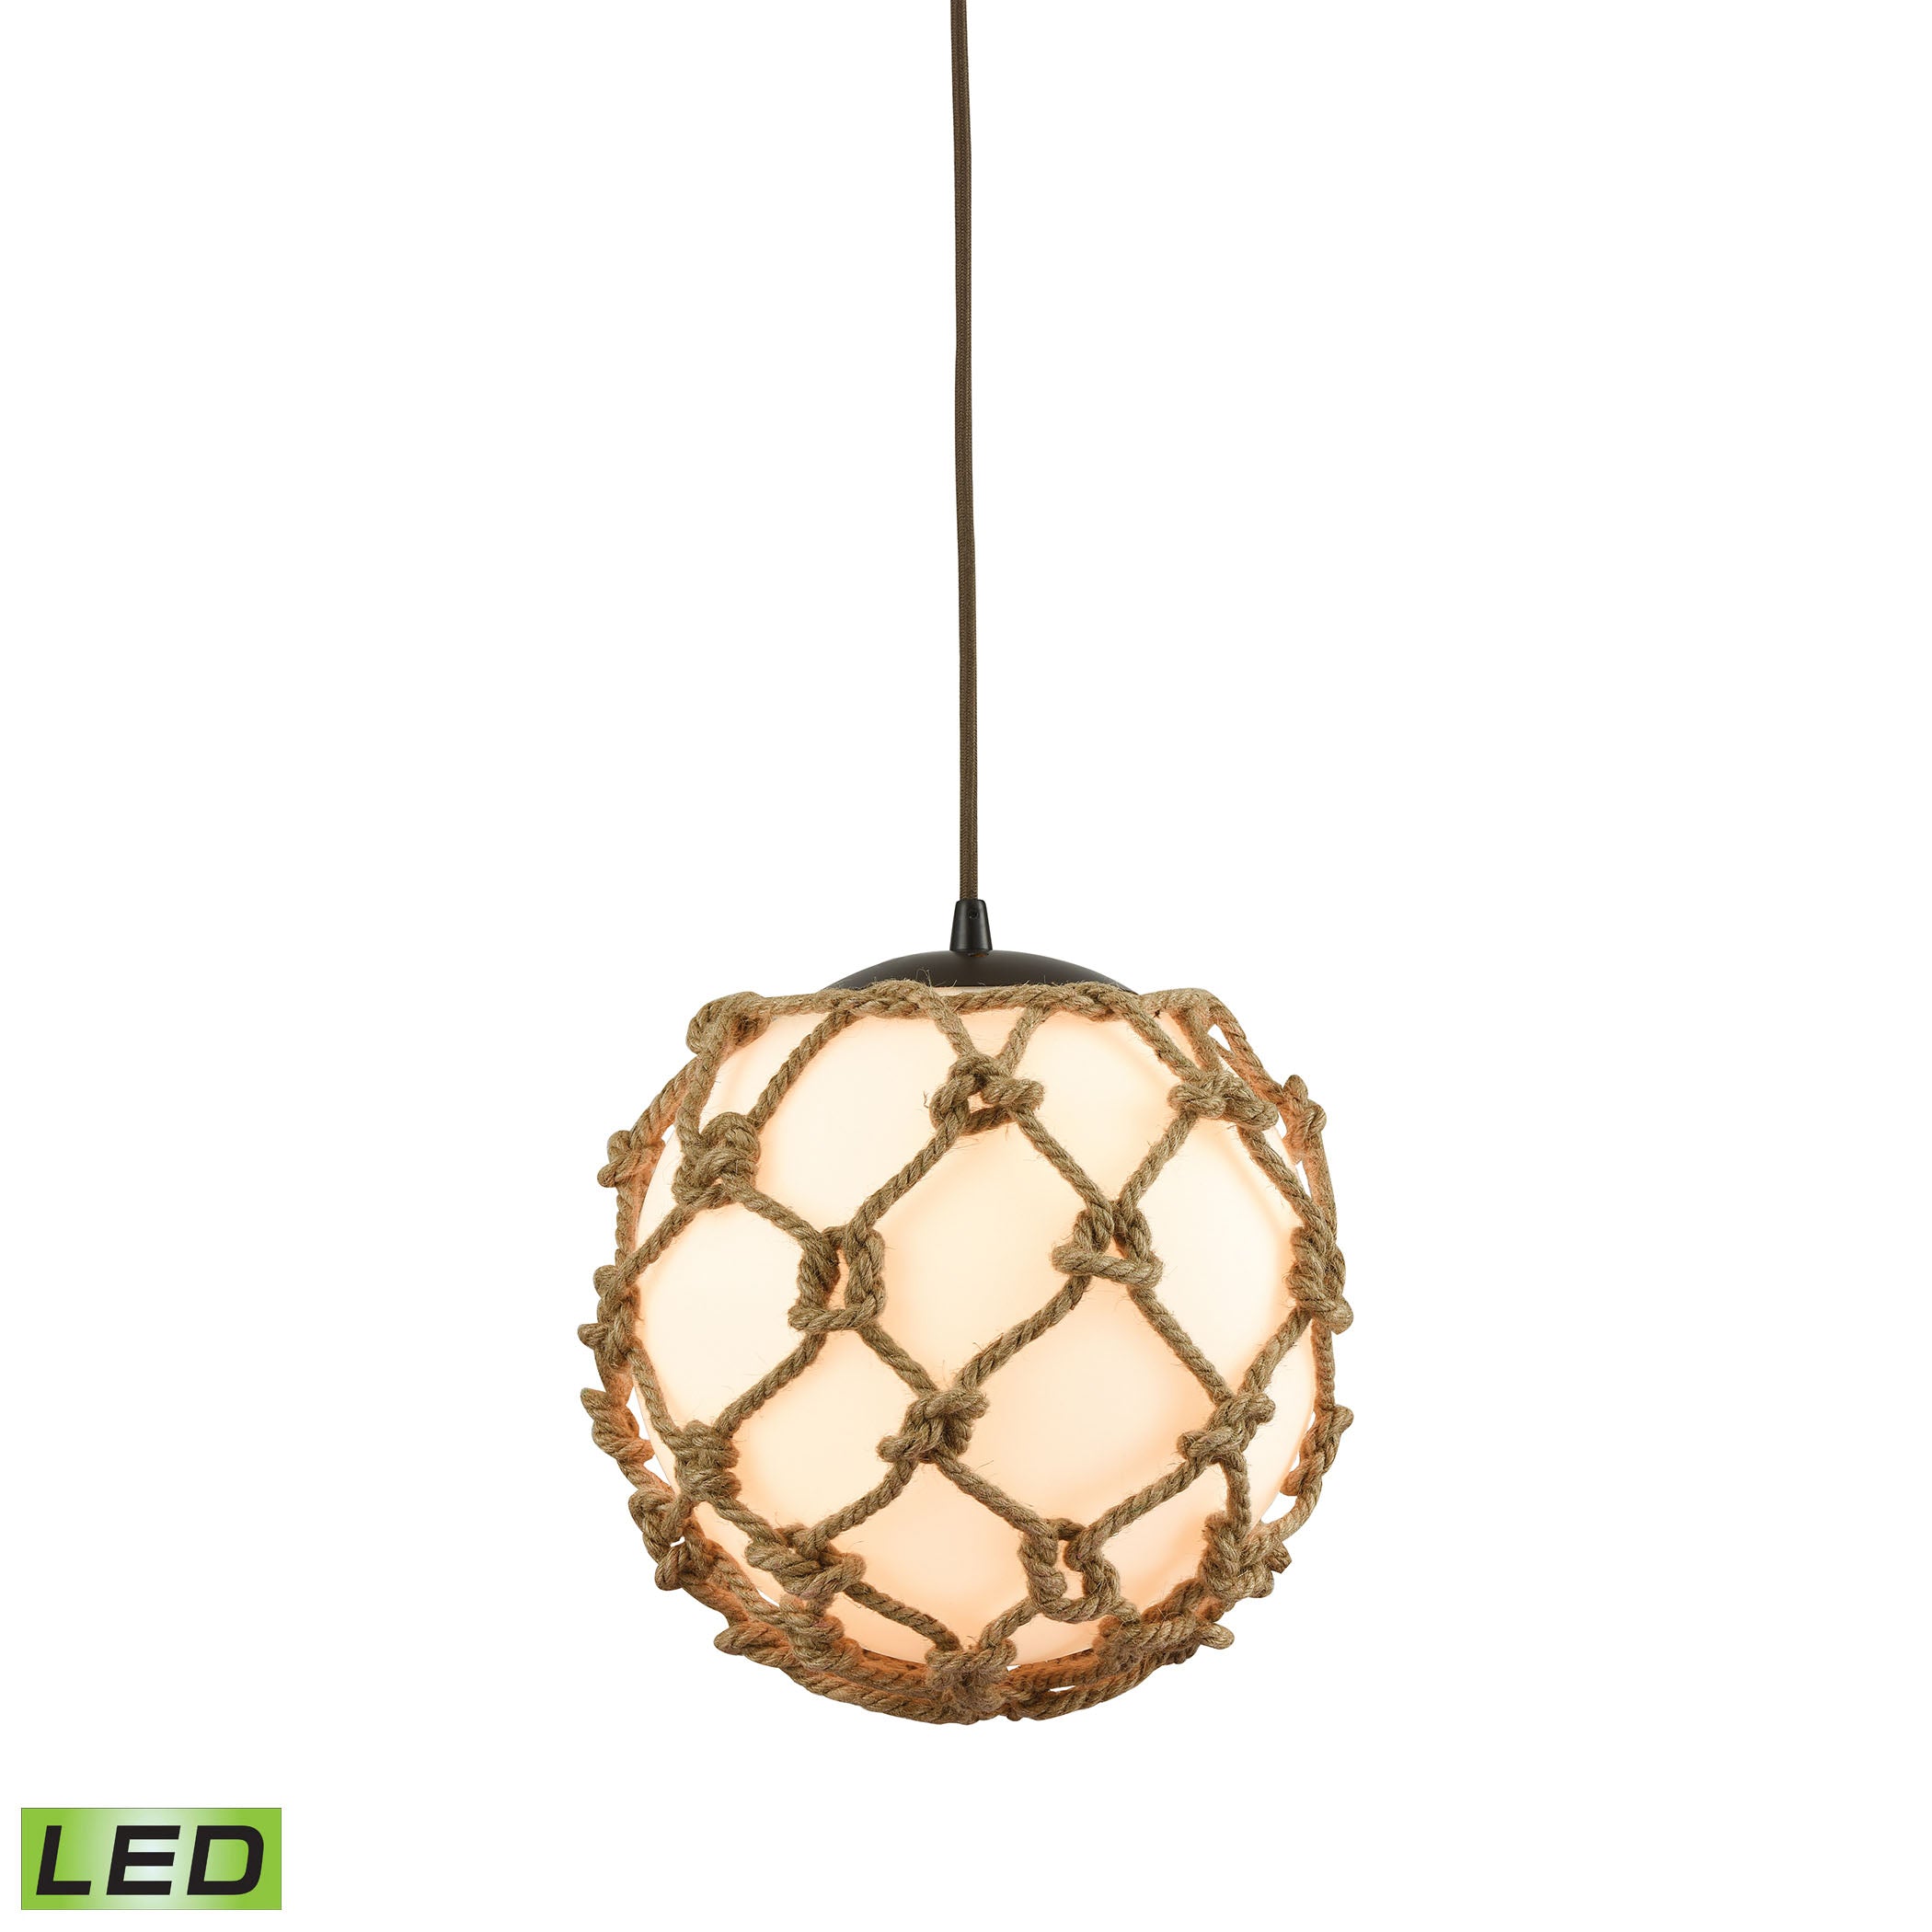 ELK Lighting 10710/1-LED Coastal Inlet 1-Light Mini Pendant in Oiled Bronze with Rope and Opal Glass - Includes LED Bulb